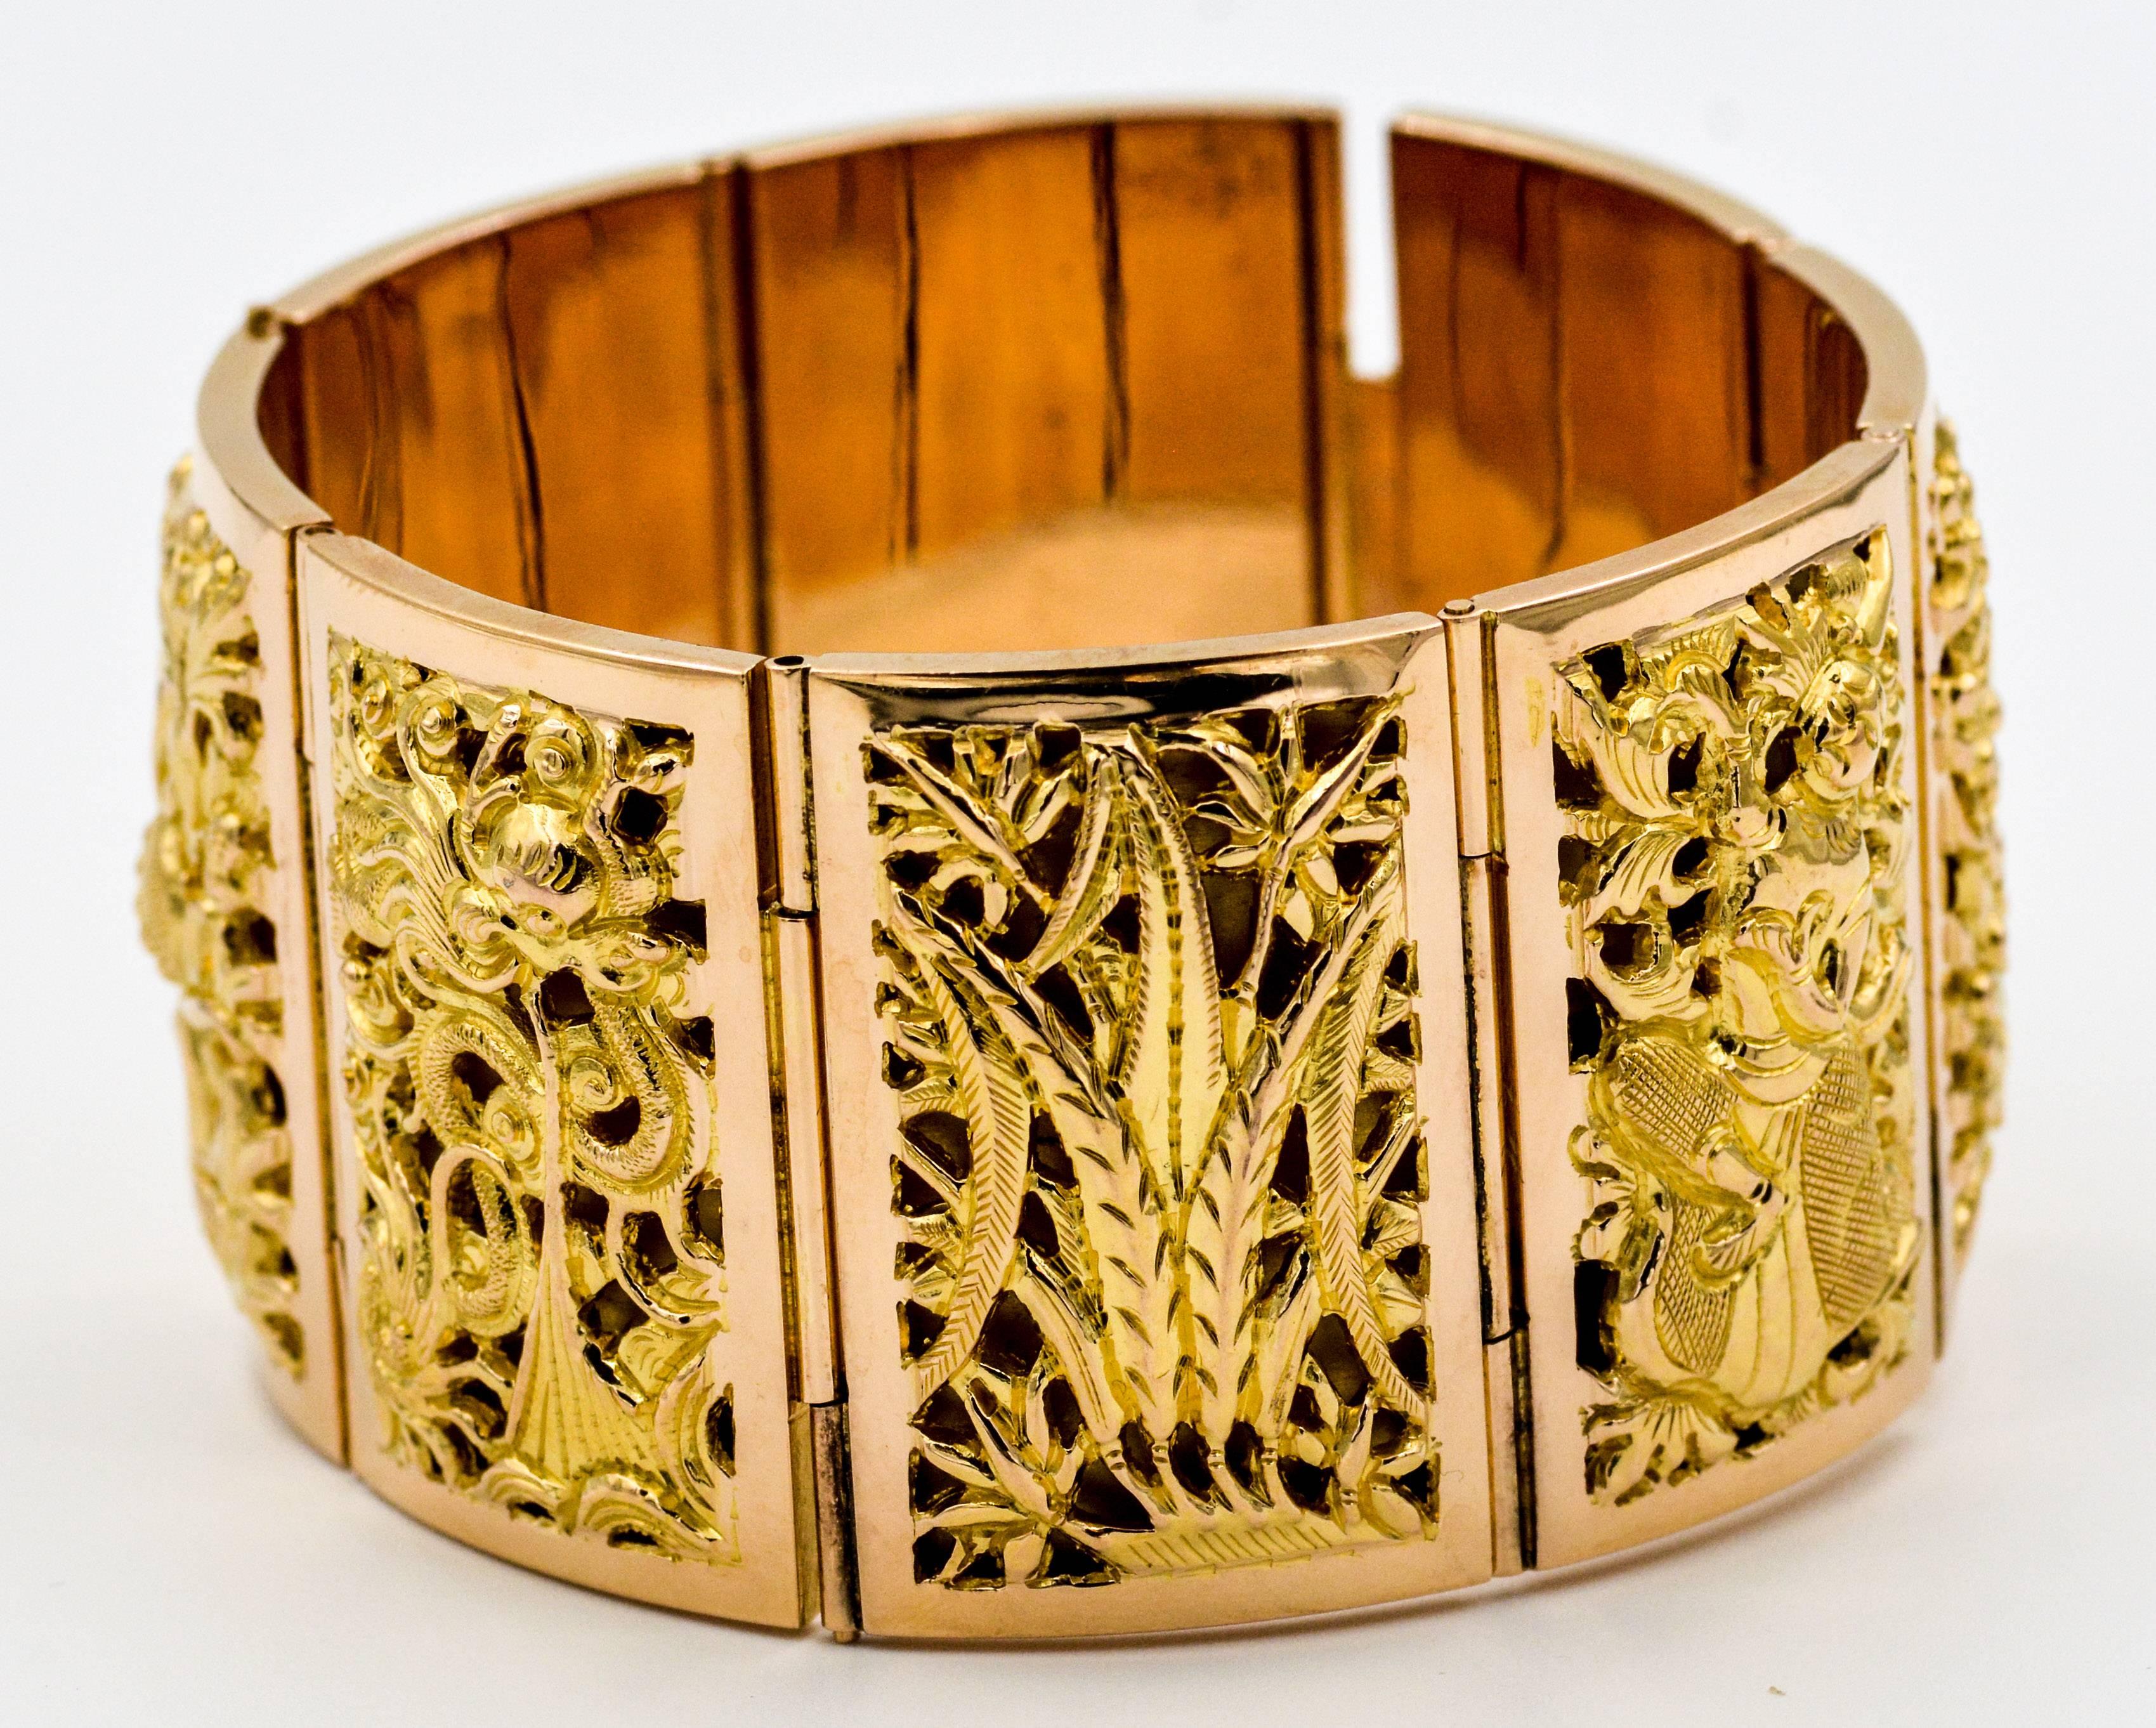 This exquisite 18 Karat classic Asian panel bracelet portrays the four seasons with a Chrysanthemum-Autumn, Bamboo-Winter, Peach Blossom-Spring, and Orchid-Winter.  Additionally this panel bracelet portrays two panels of a dancing woman.  This